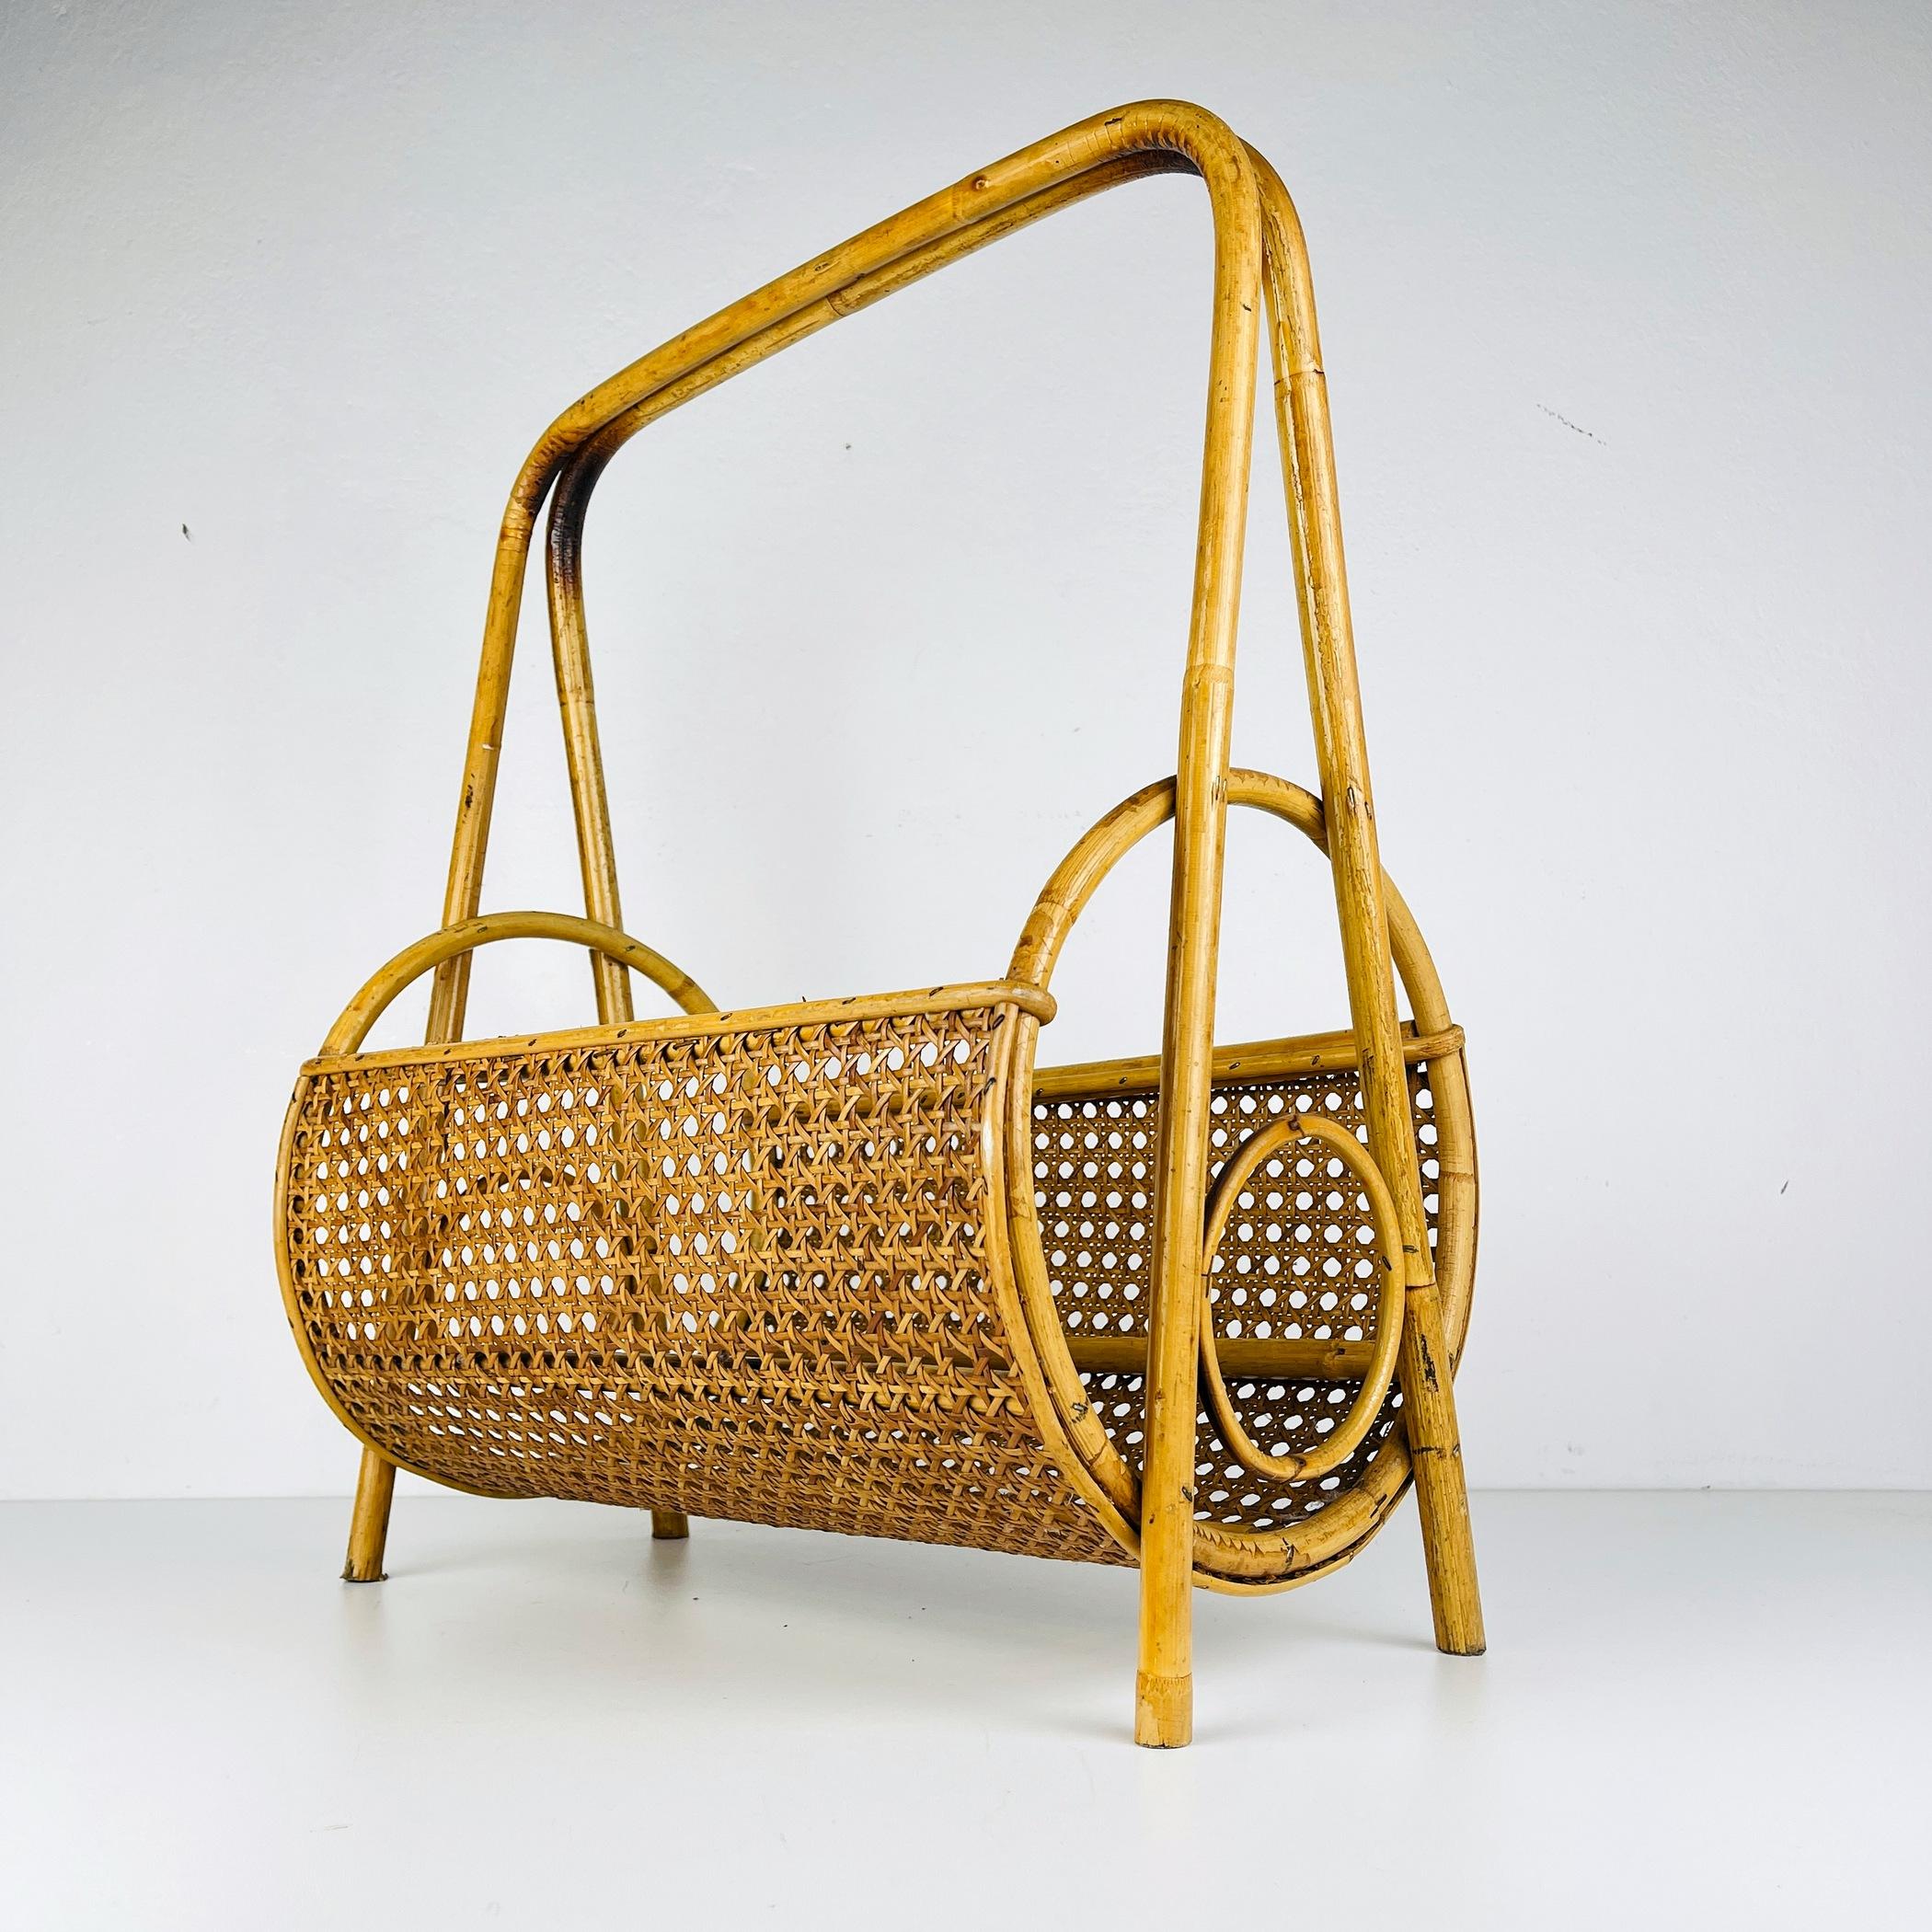 Step into the world of refined mid-century style with this stunning bamboo and rattan magazine stand. Its unique circular shape and intricate details crafted from original Vienna straw make it the perfect complement to a retro-inspired interior.